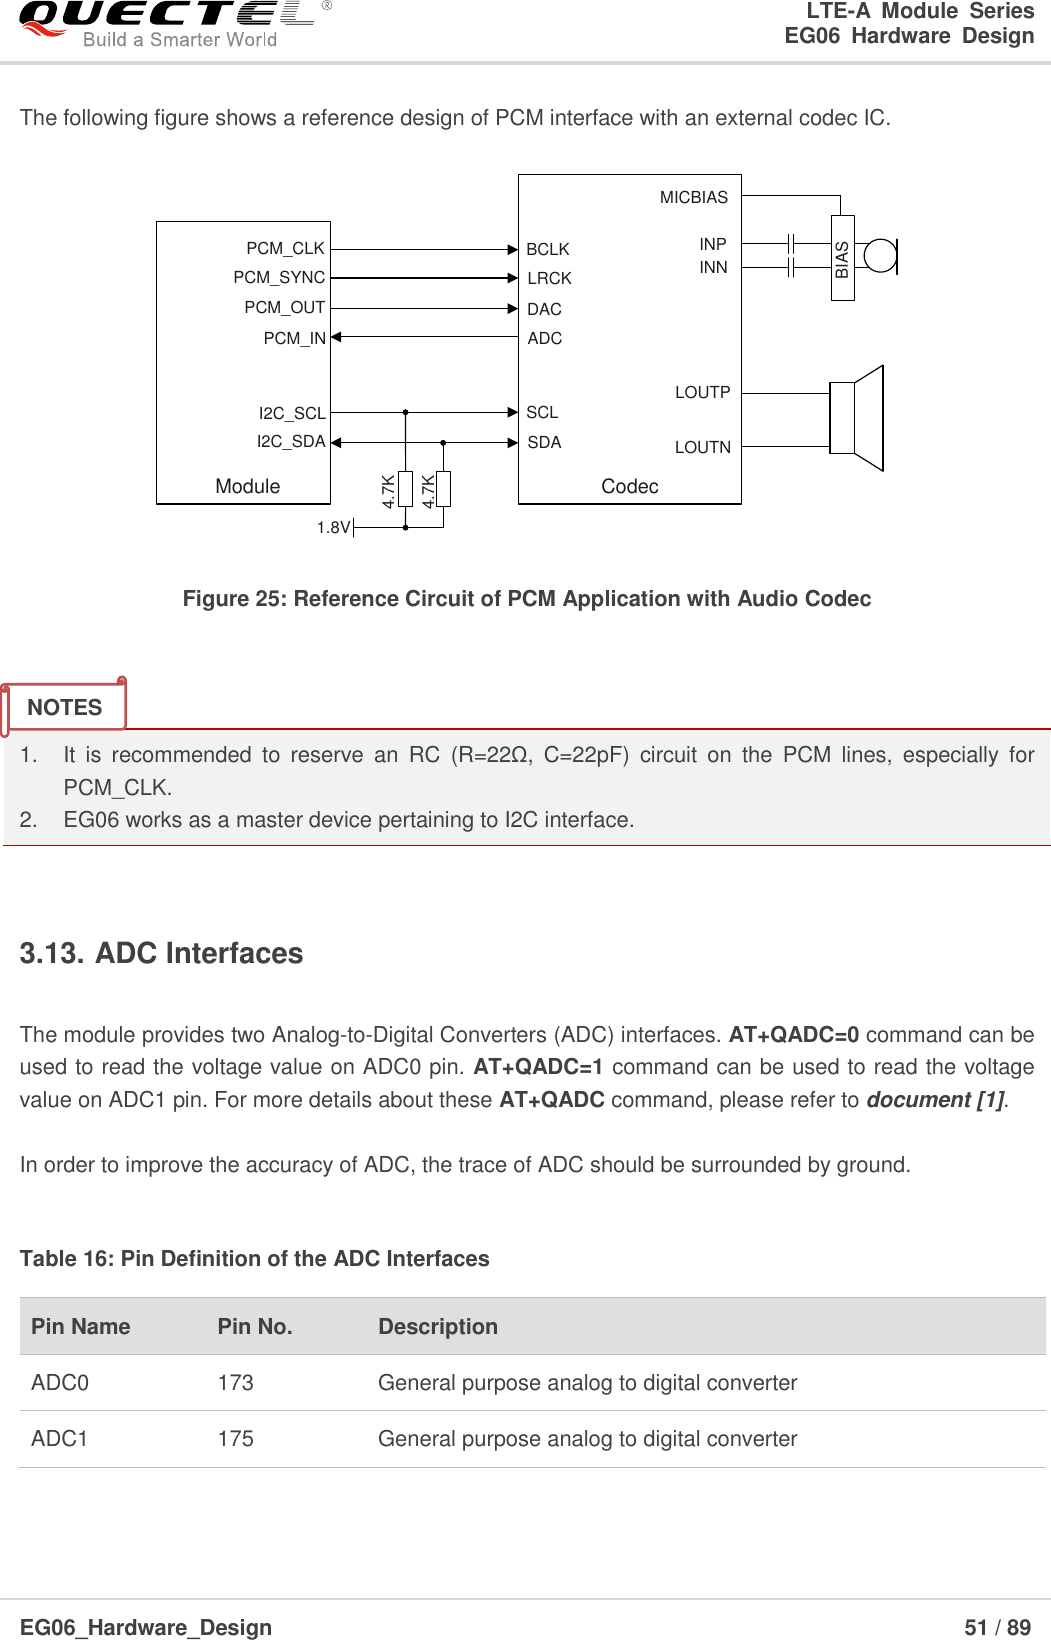 LTE-A  Module  Series                                                  EG06  Hardware  Design  EG06_Hardware_Design                                                               51 / 89    The following figure shows a reference design of PCM interface with an external codec IC. PCM_INPCM_OUTPCM_SYNCPCM_CLKI2C_SCLI2C_SDAModule1.8V4.7K4.7KBCLKLRCKDACADCSCLSDABIASMICBIASINPINNLOUTPLOUTNCodec Figure 25: Reference Circuit of PCM Application with Audio Codec   1.  It  is  recommended  to  reserve  an  RC  (R=22Ω,  C=22pF)  circuit  on  the  PCM  lines,  especially  for PCM_CLK. 2.  EG06 works as a master device pertaining to I2C interface.  3.13. ADC Interfaces  The module provides two Analog-to-Digital Converters (ADC) interfaces. AT+QADC=0 command can be used to read the voltage value on ADC0 pin. AT+QADC=1 command can be used to read the voltage value on ADC1 pin. For more details about these AT+QADC command, please refer to document [1].  In order to improve the accuracy of ADC, the trace of ADC should be surrounded by ground.  Table 16: Pin Definition of the ADC Interfaces   Pin Name Pin No. Description ADC0 173 General purpose analog to digital converter ADC1 175 General purpose analog to digital converter NOTES 